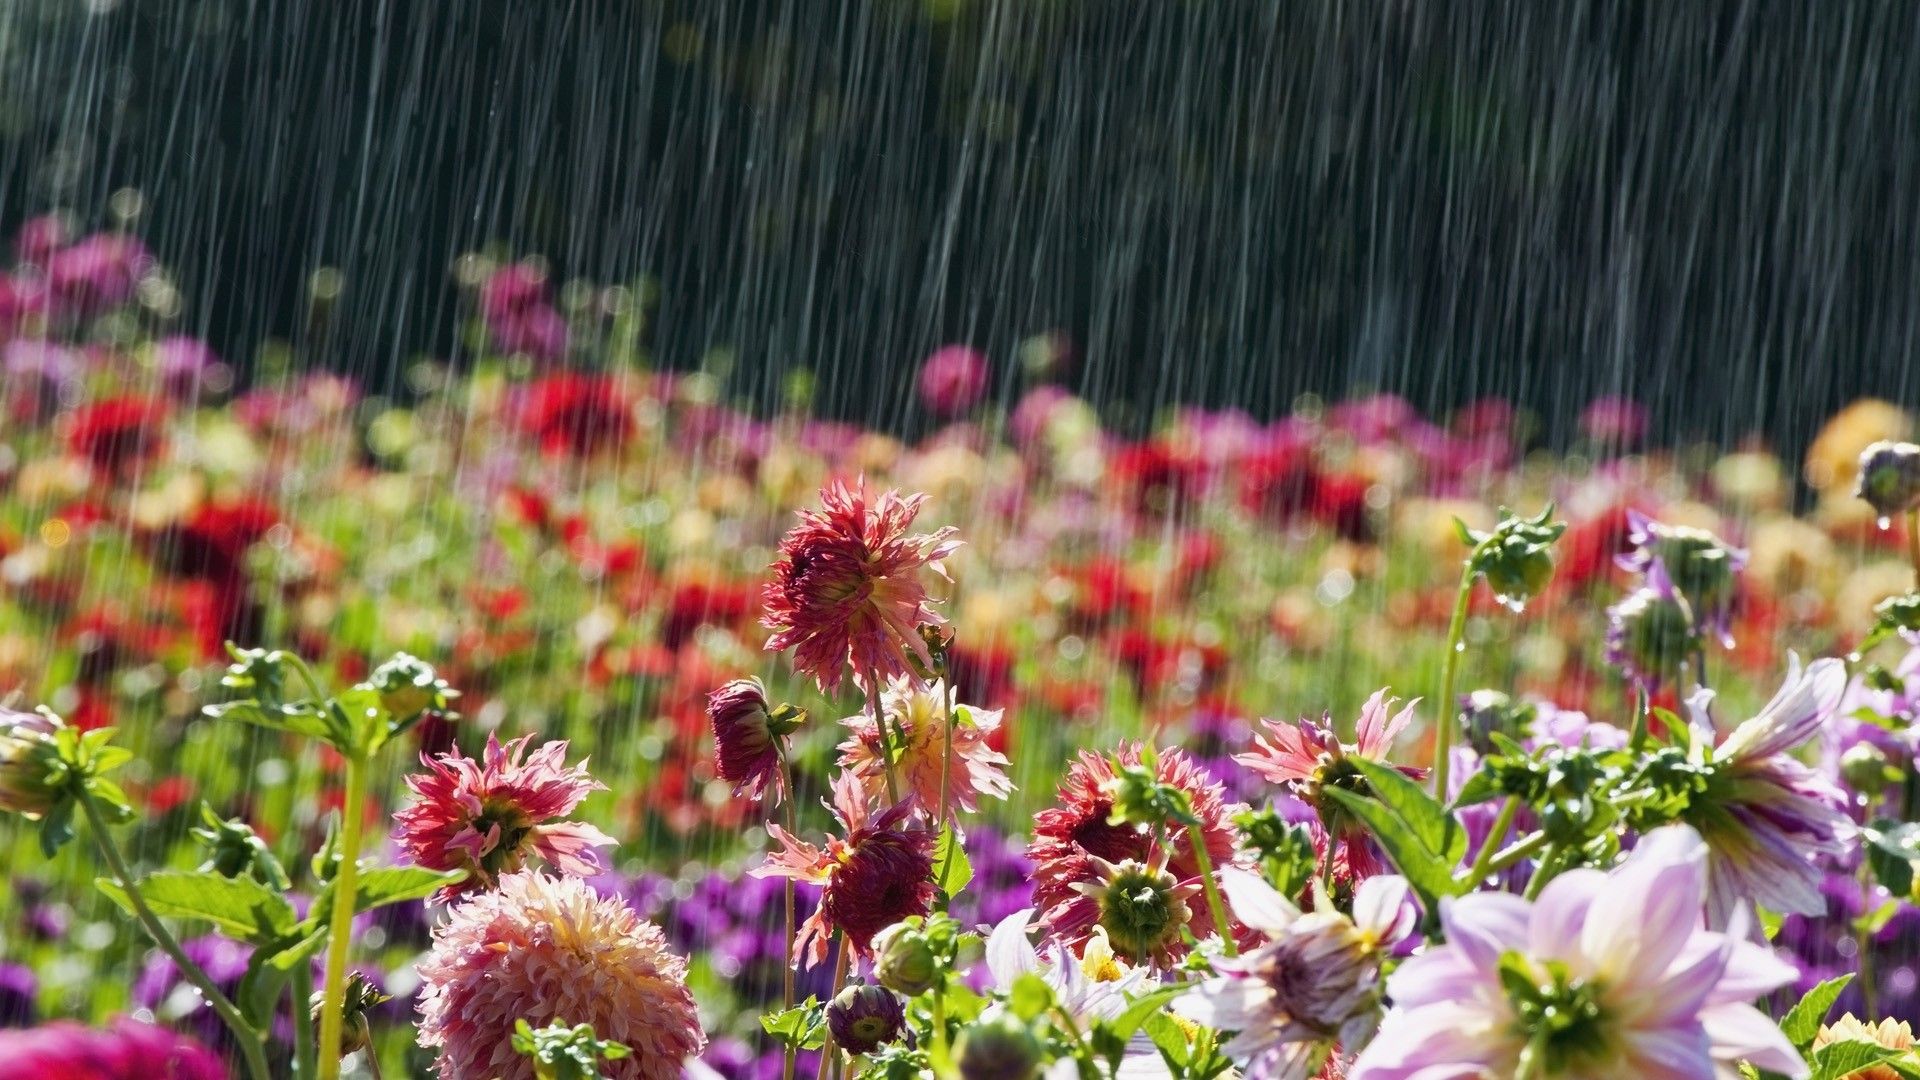 Free download Rain Falling HD Wallpaper Picture Image Background [1920x1080] for your Desktop, Mobile & Tablet. Explore Rainy Spring Day Wallpaper. Rainy Day Background, Rainy Day Wallpaper, Rainy Day Wallpaper